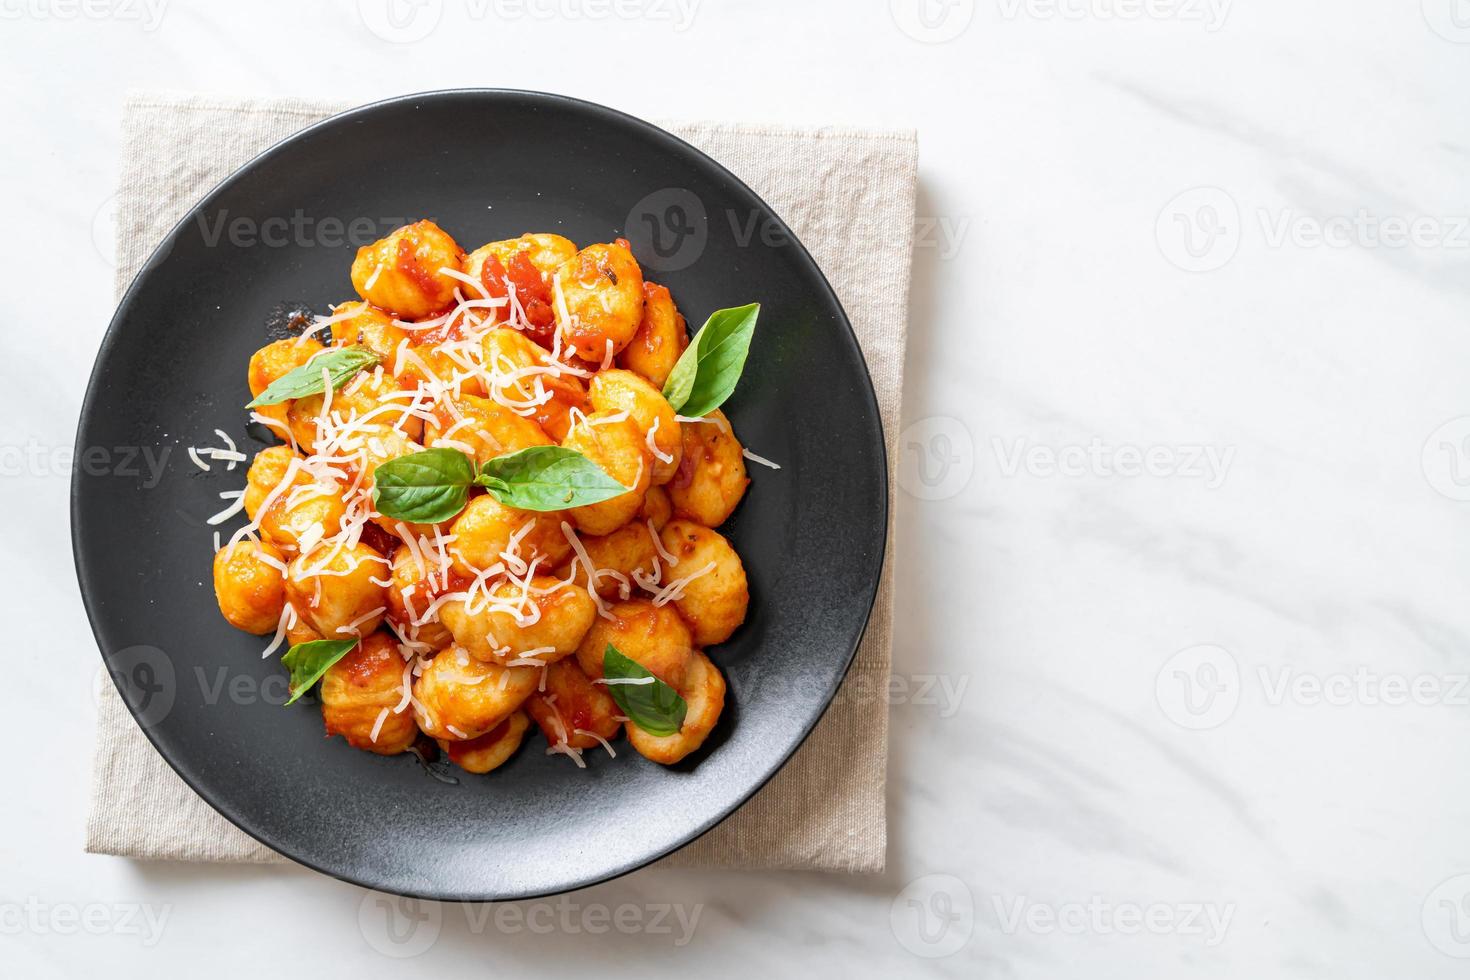 Gnocchi in tomato sauce with cheese - Italian food style photo